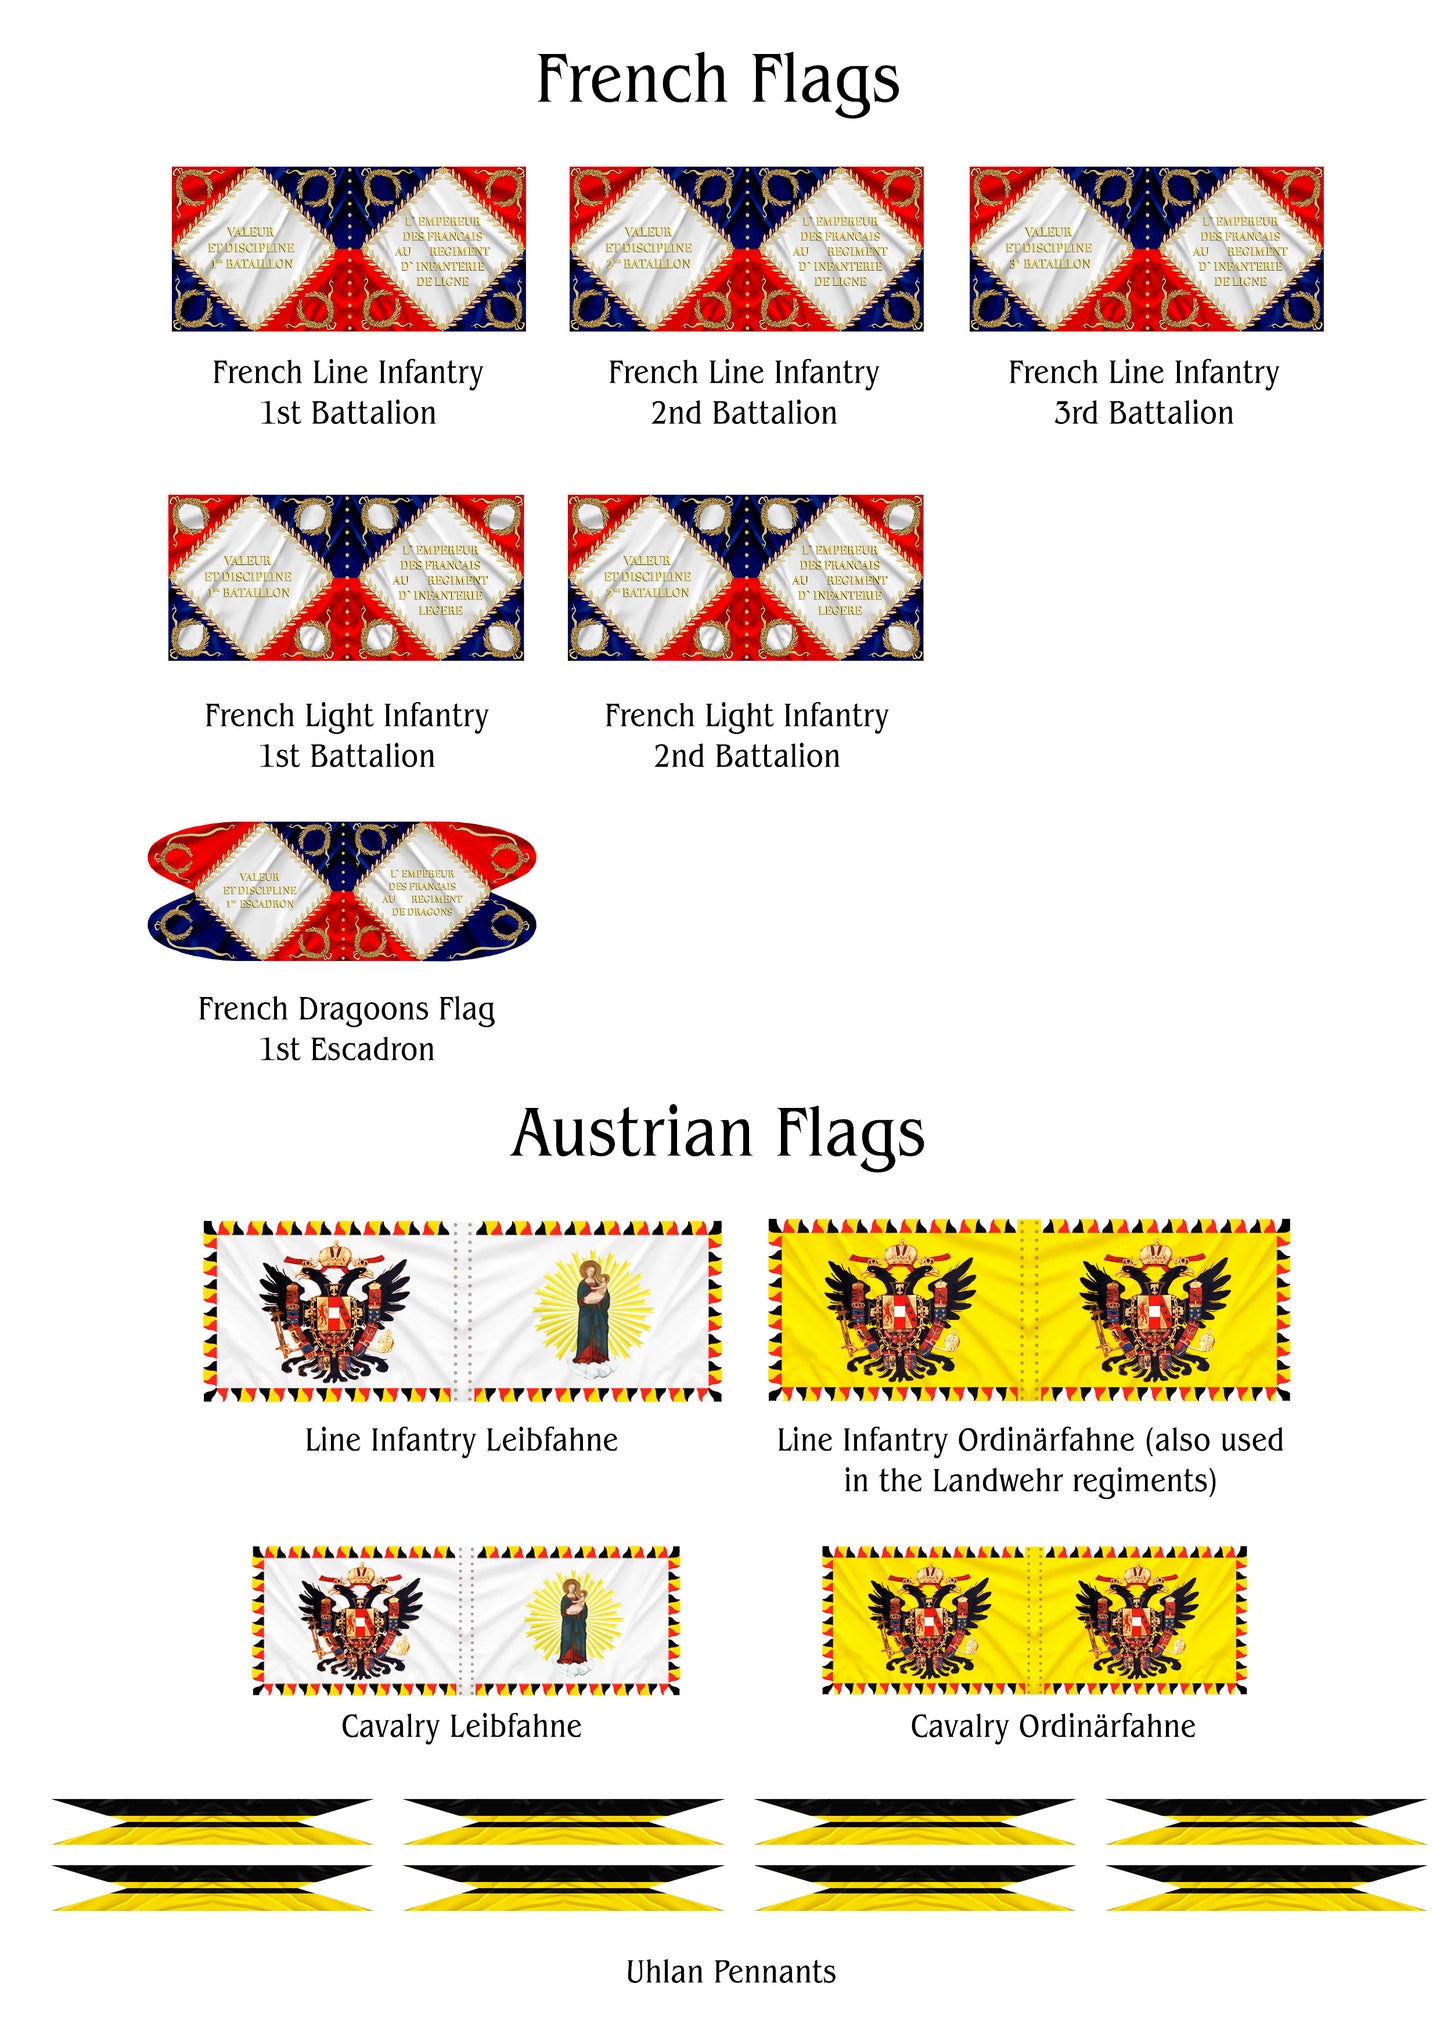 The Danube Campaign - Part 1 Flags for Printing (French and Austrians